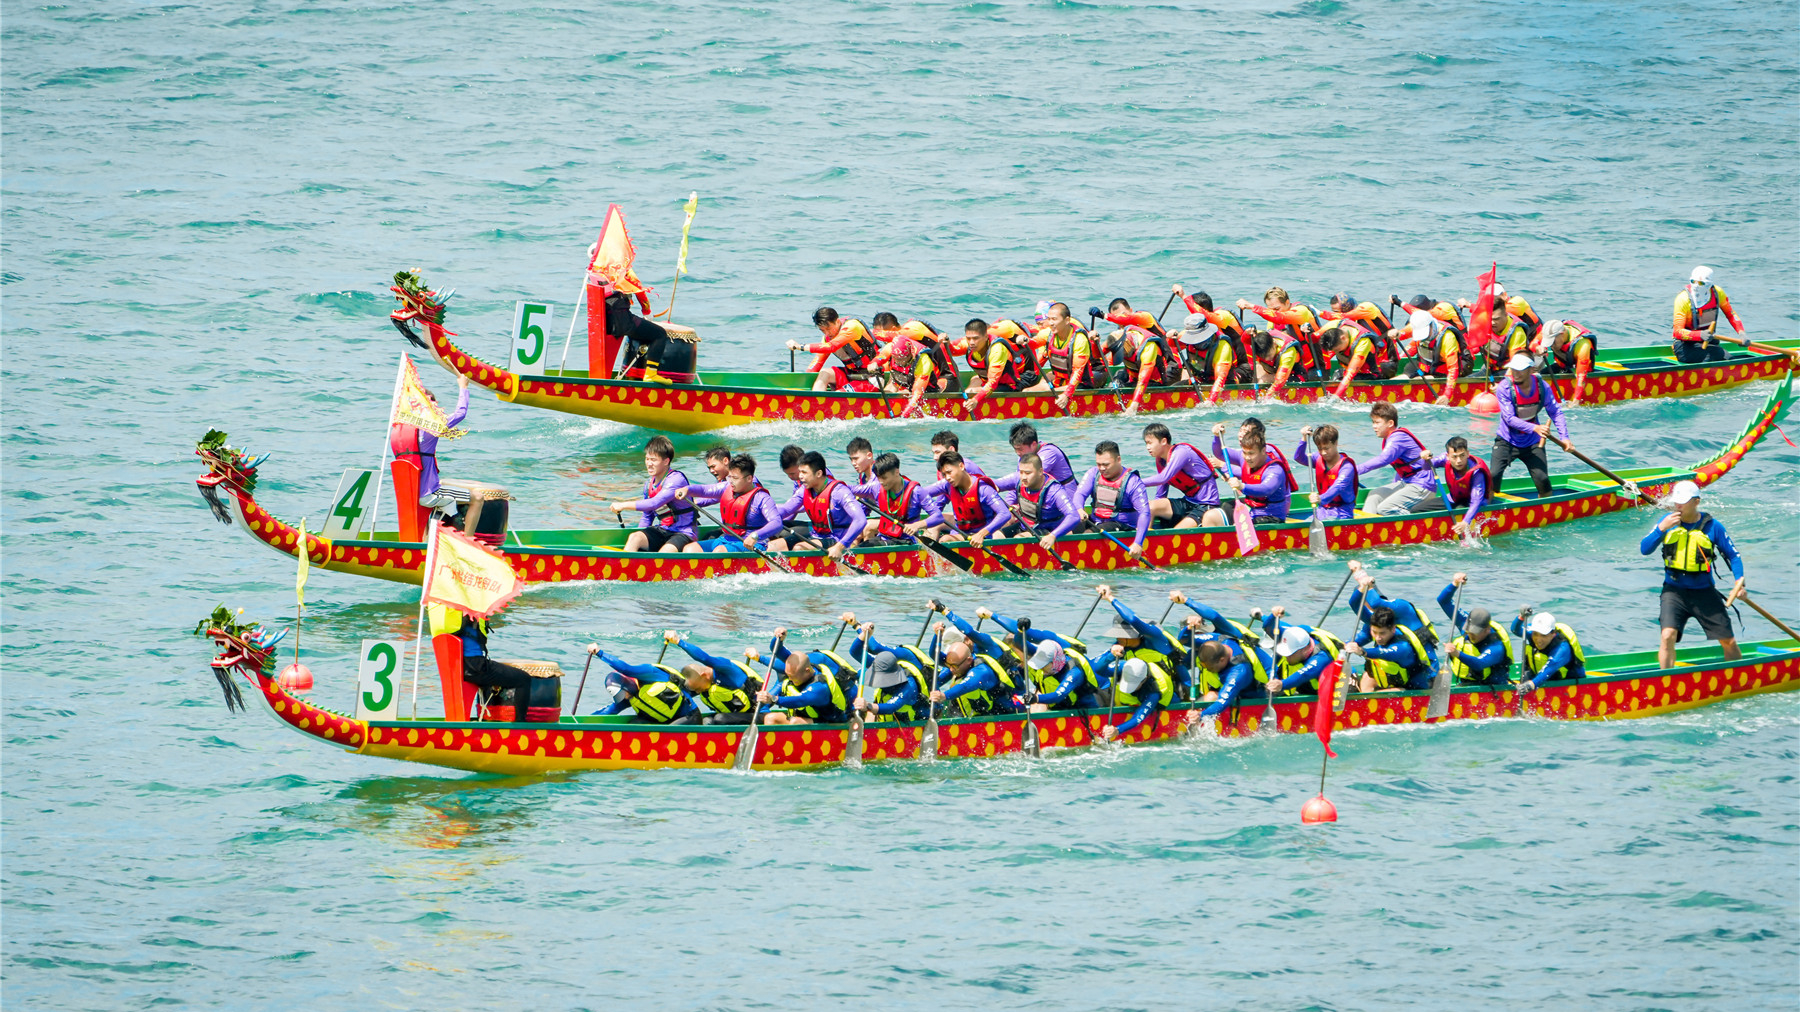 Traditions you may not know about the Dragon Boat Festival in Guangdong